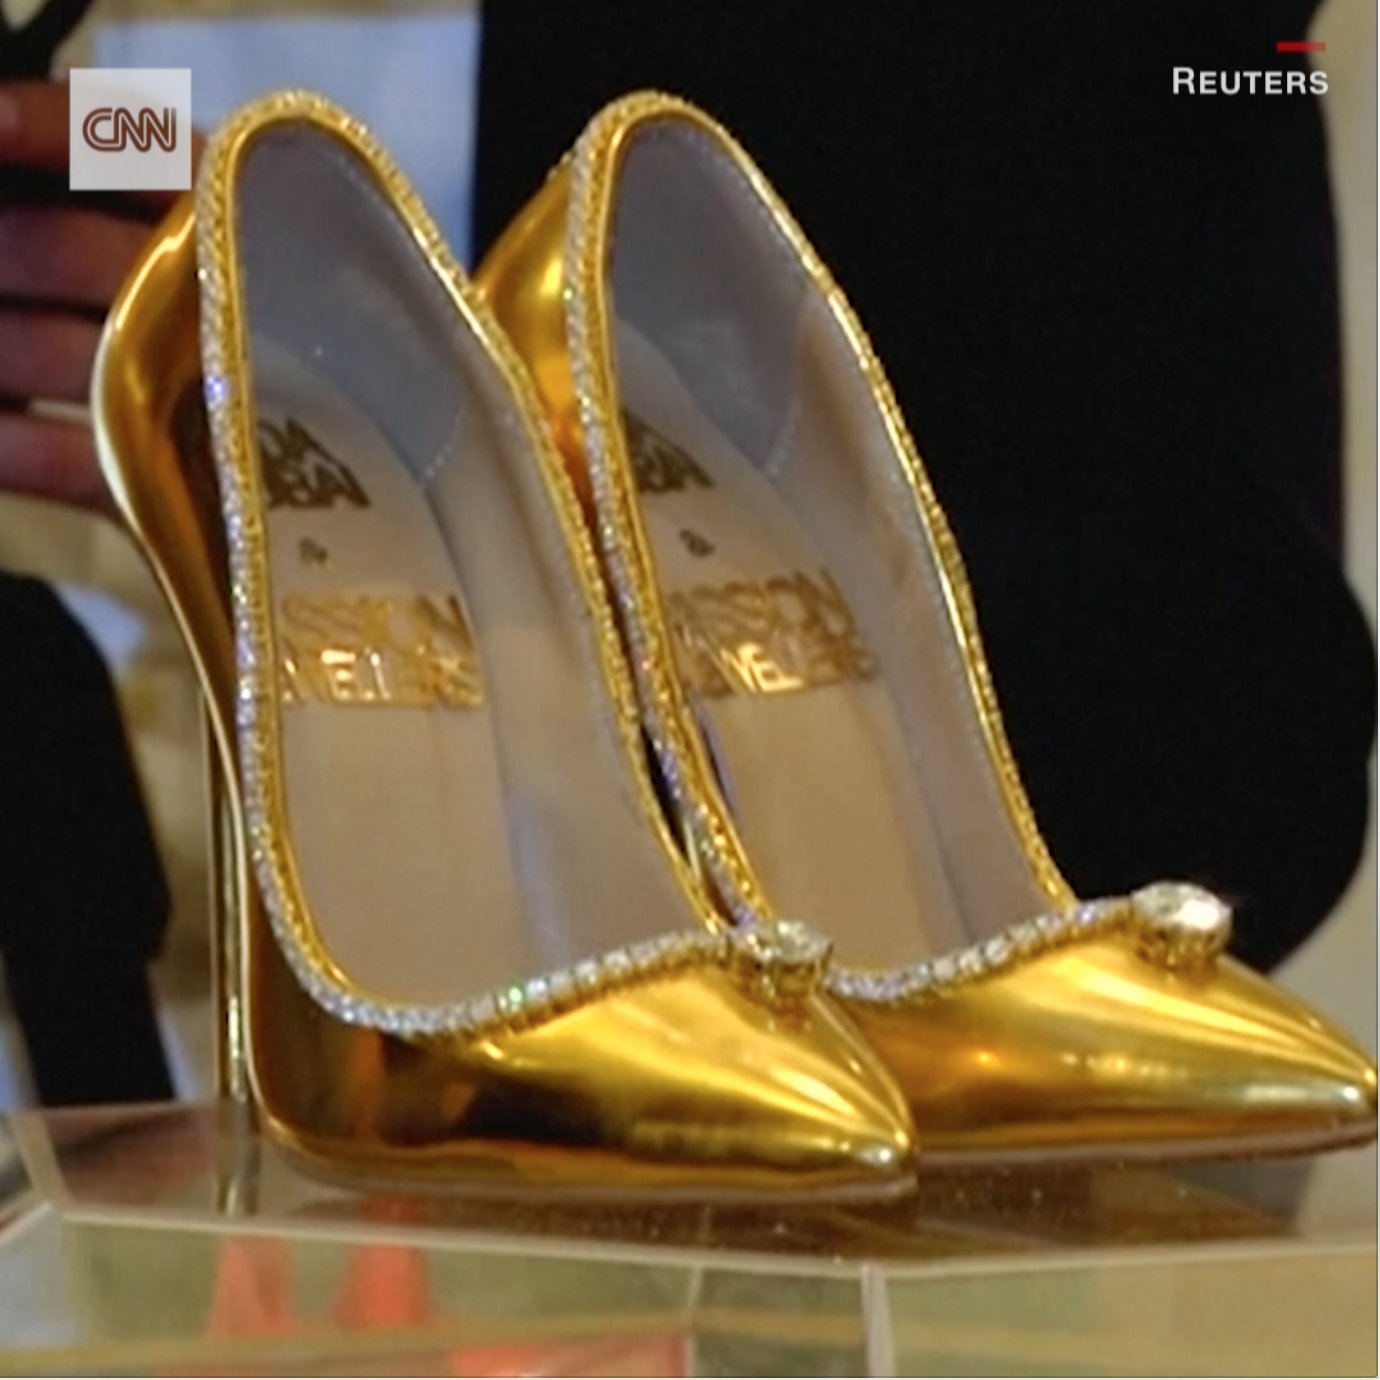 CNN on X: Called The Passion Diamond Shoes, these gold and  diamond-encrusted stilettos are believed to be the world's most expensive  shoes at $17 million   / X